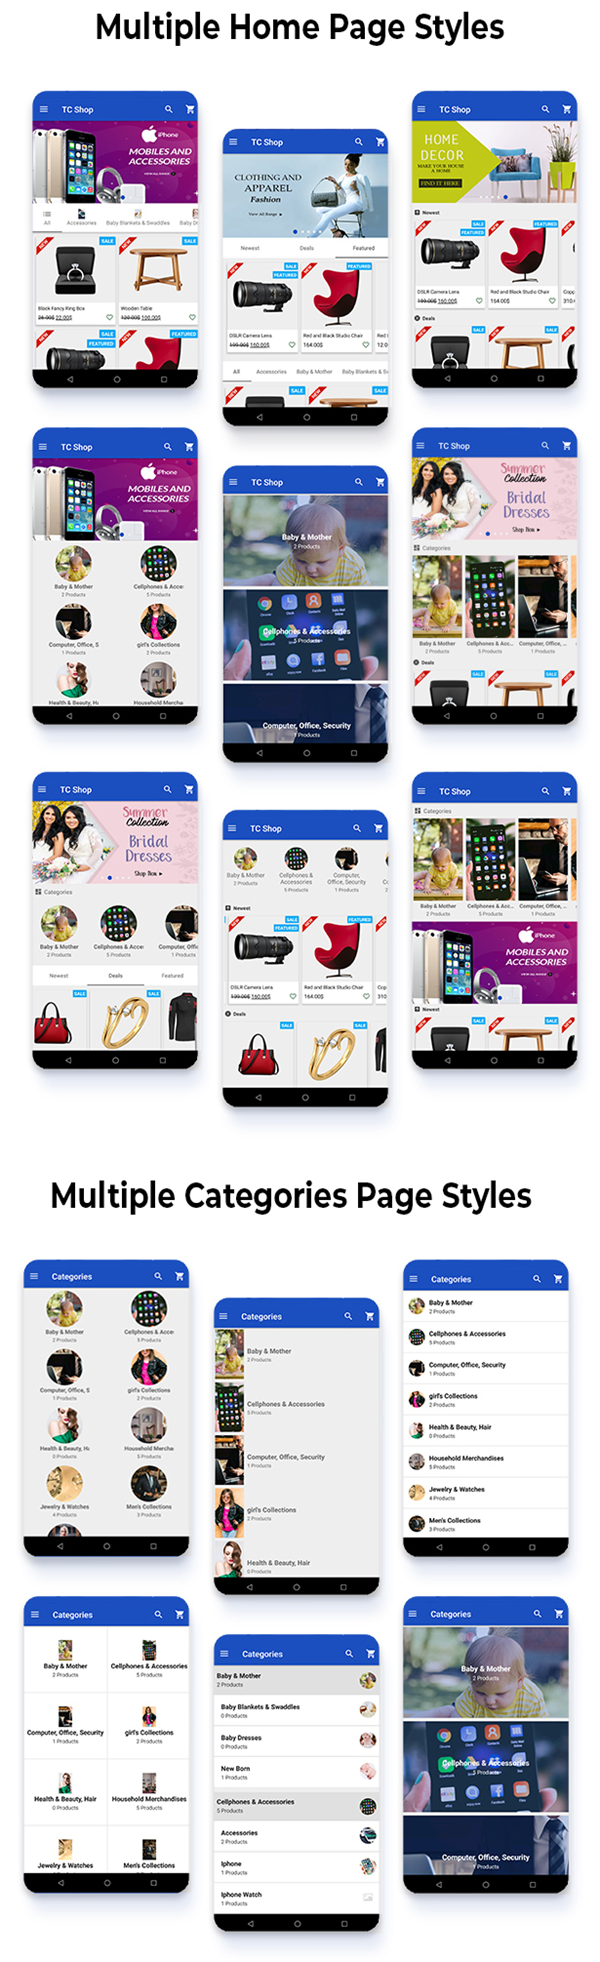 Android Woocommerce - Universal Native Android Ecommerce / Store Full Mobile Application - 6